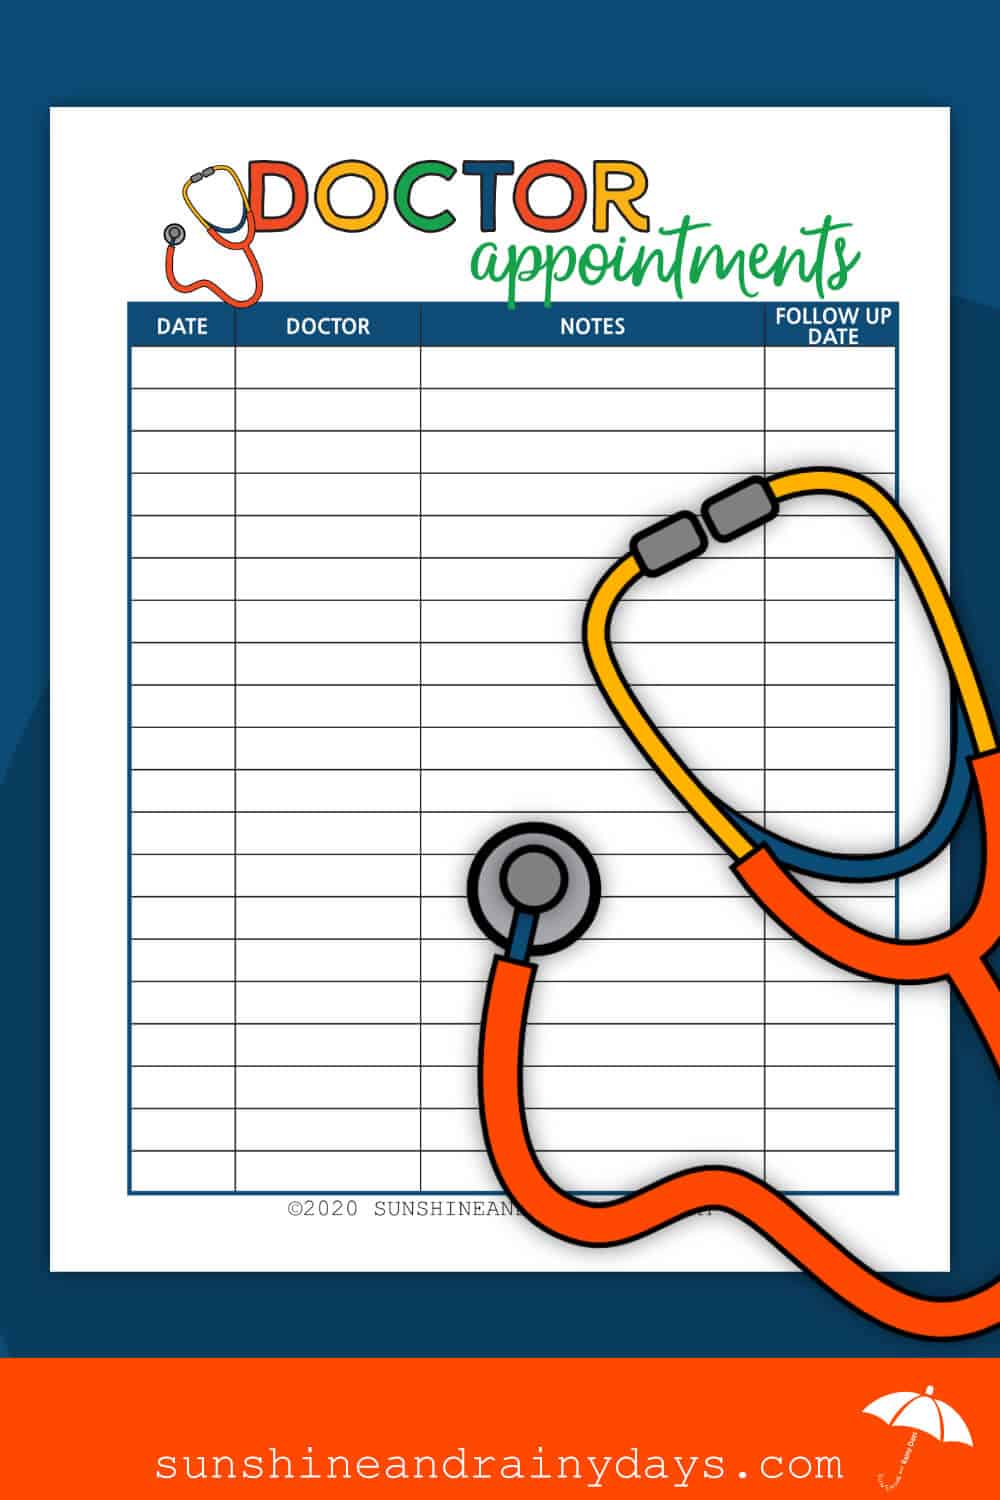 Doctor Appointments Printable - Track Your Doctor Visits - Sunshine and Rainy Days